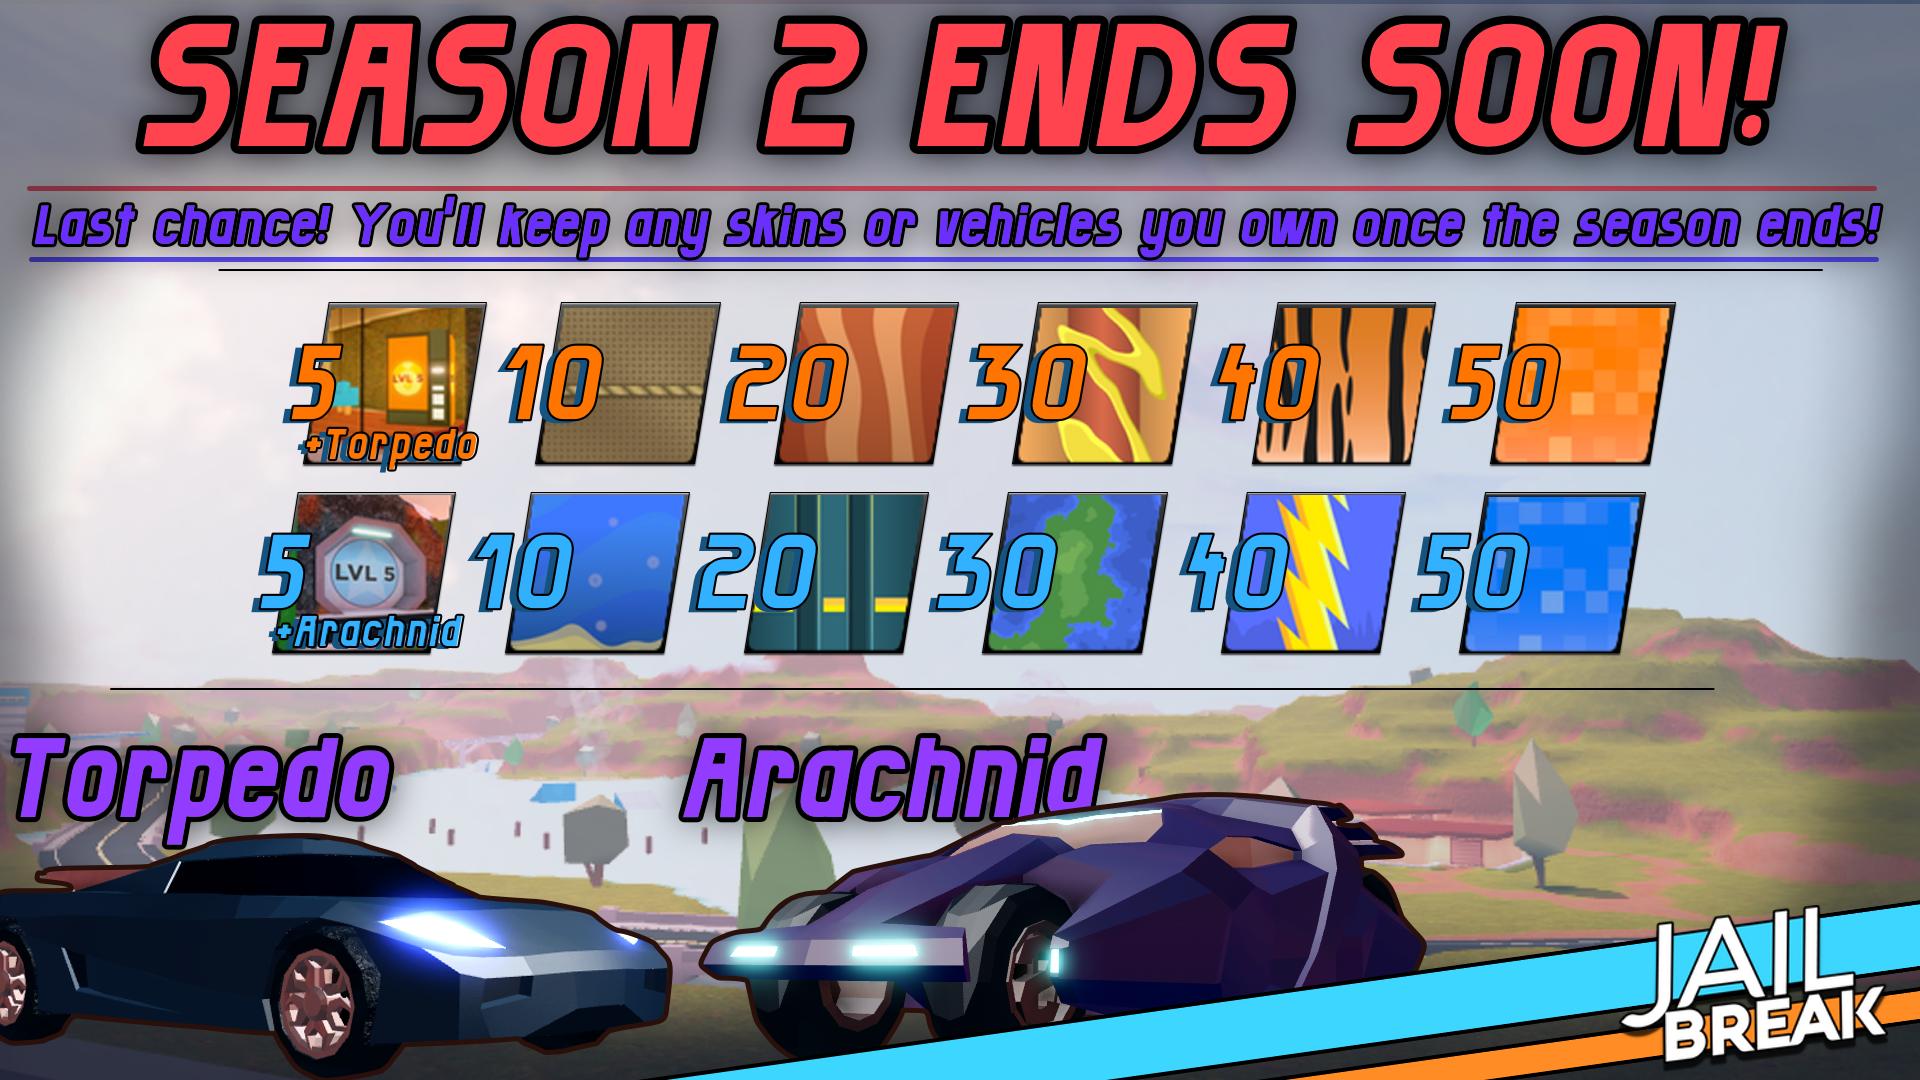 Badimo Jailbreak On Twitter Summer Is Here Next Week And So Is The Summer Season Of Jailbreak This Is Your Last Chance For Season 2 Items You Will Keep Any - roblox jailbreak car skins